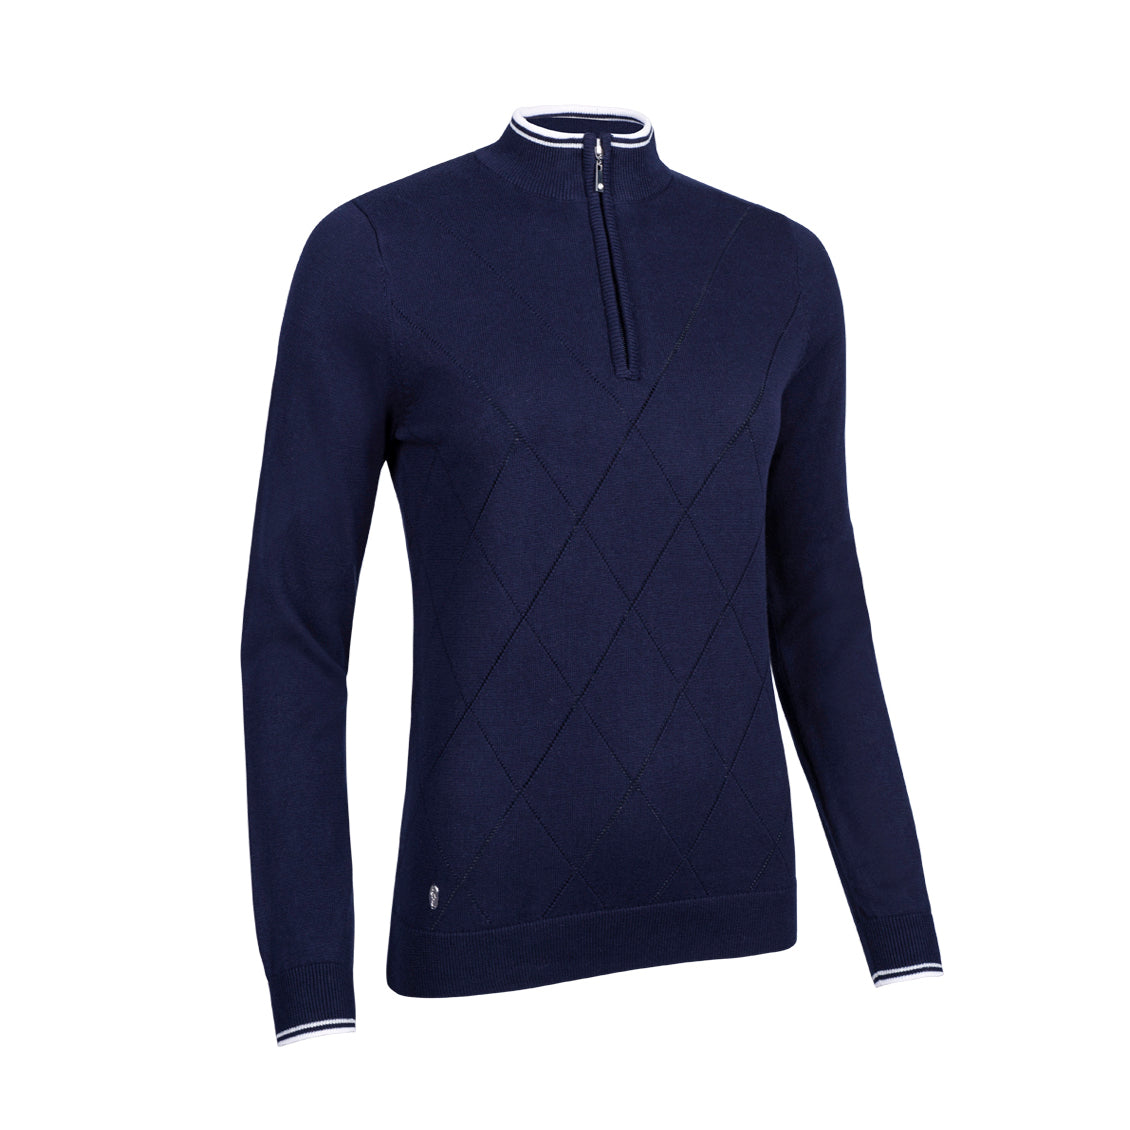 Glenmuir Ladies Long Sleeve Sweater with Pointelle Diamond Design in Navy/White/Silver